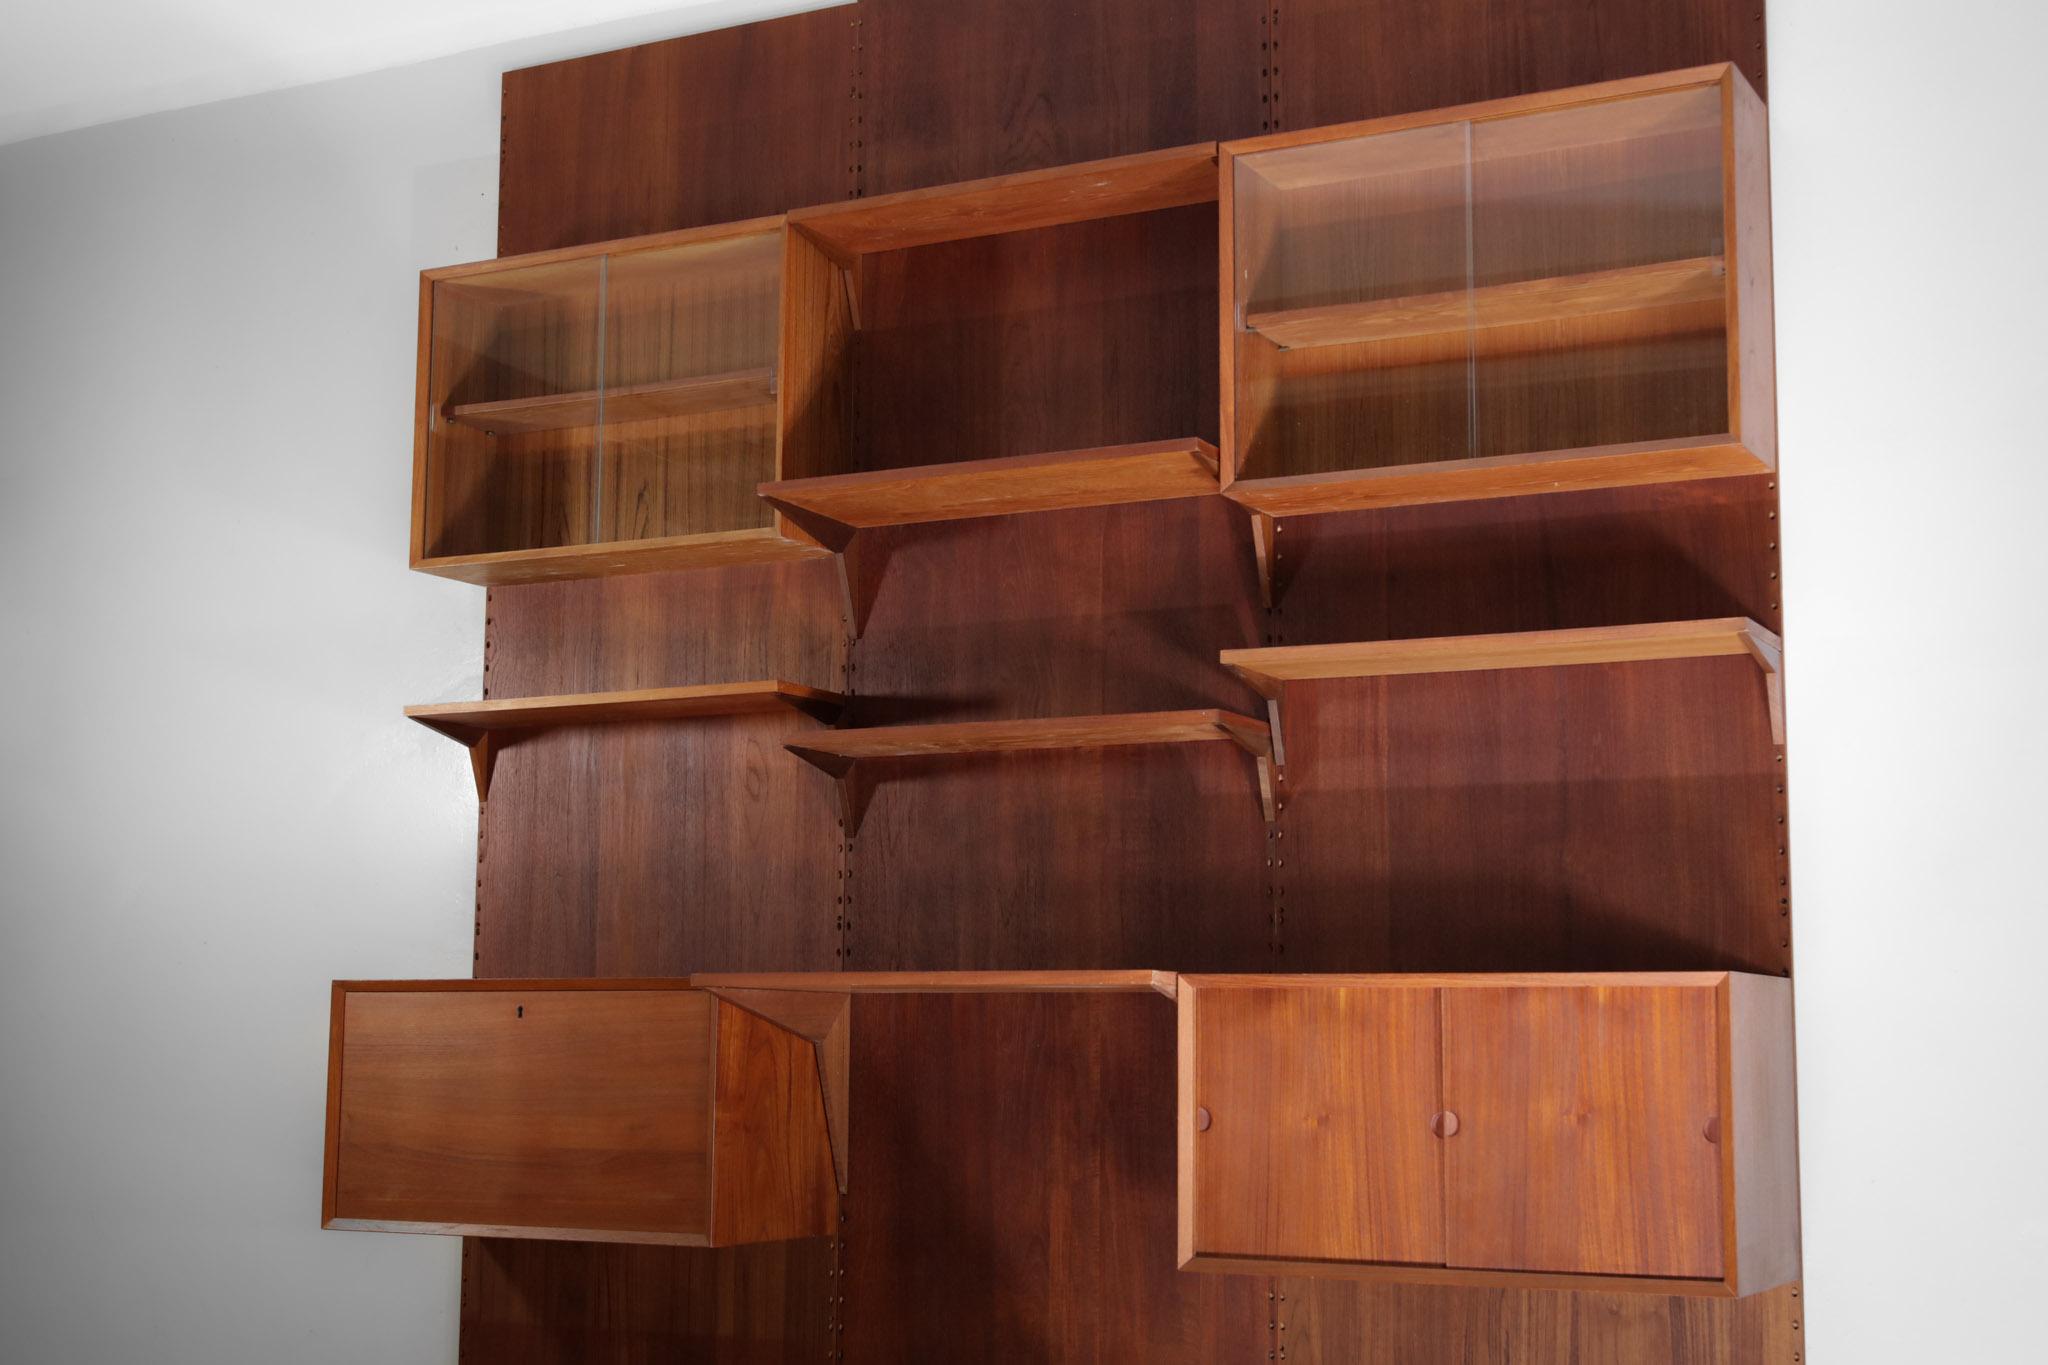 Large Danish Teak Wall Bookcase by Poul Cadovius 3 Sides Scandinavian, F139 1